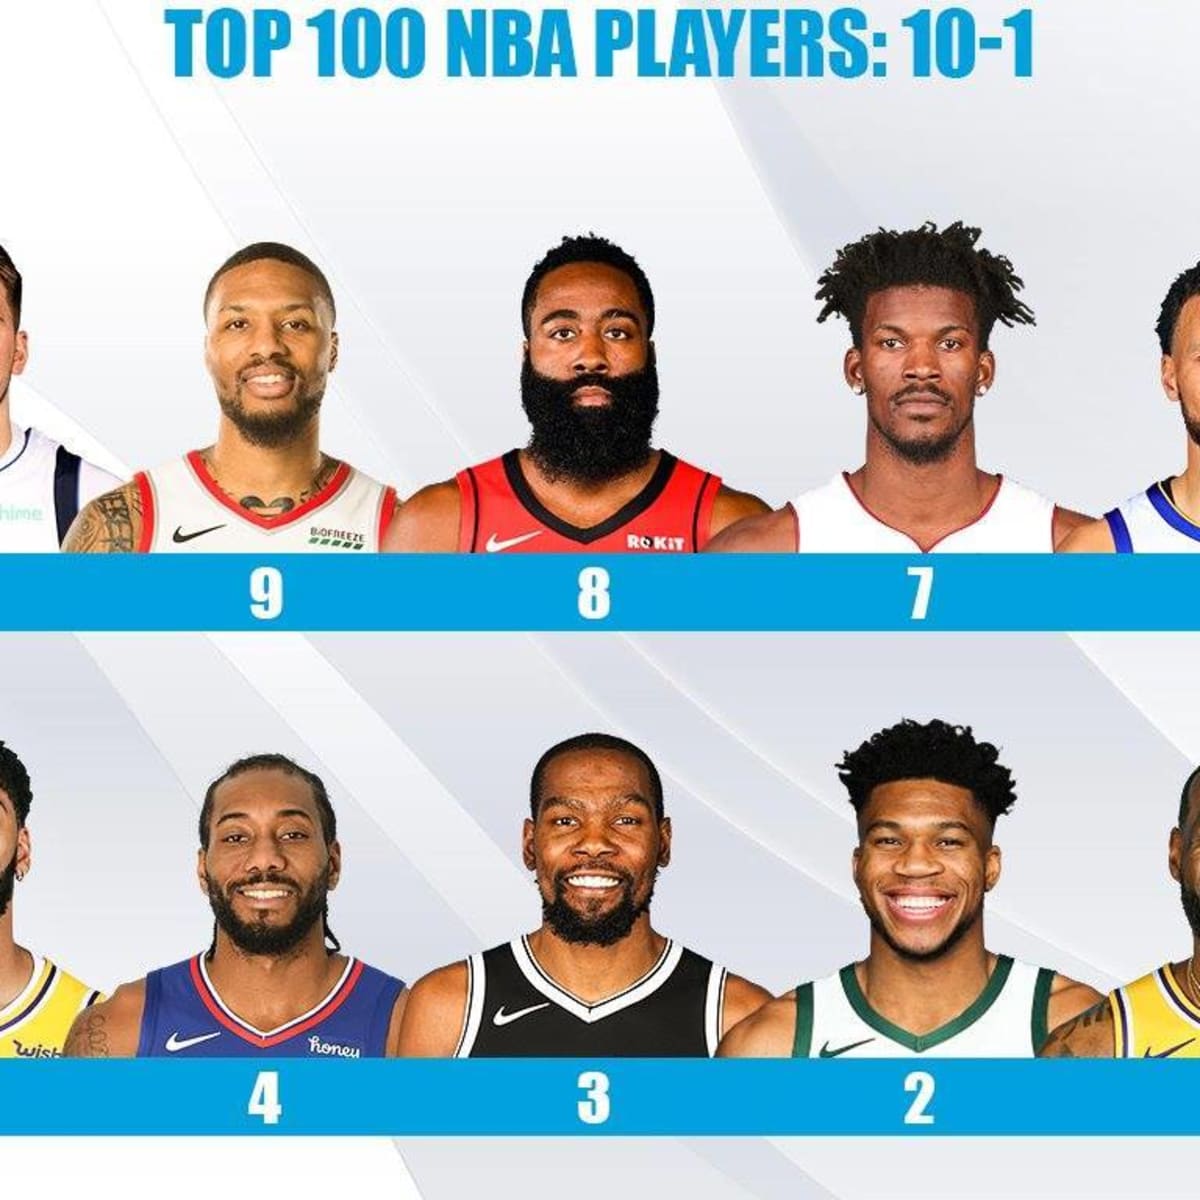 CAN YOU NAME THE TOP 100 BEST NBA PLAYERS? 